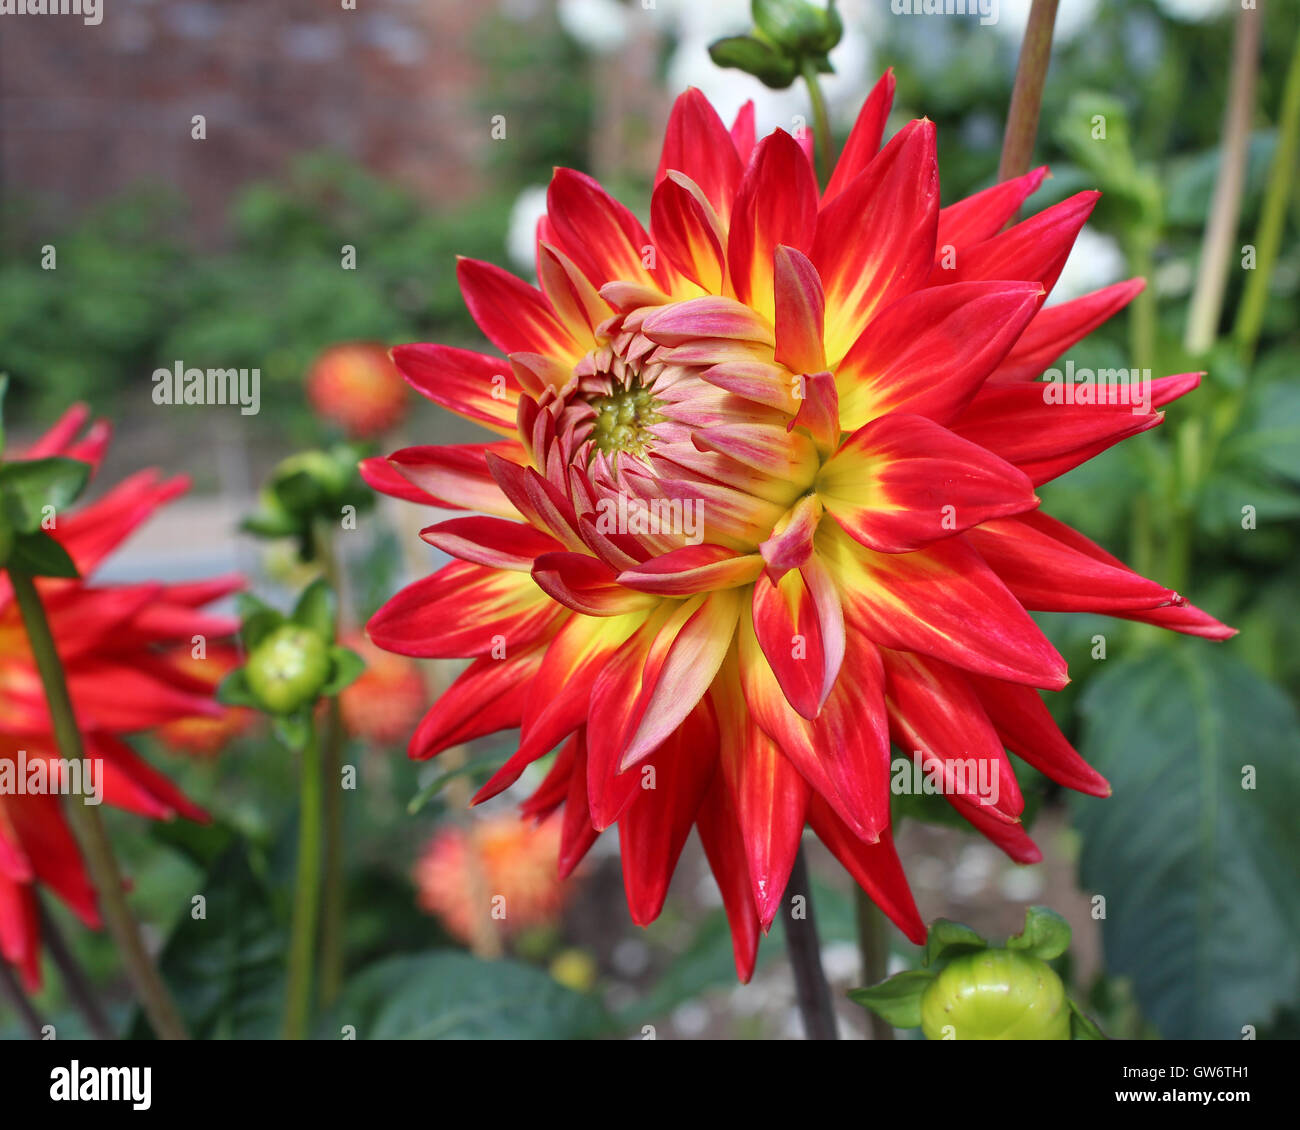 The striking variegated flower of a bi-coloured Dahlia plant. Stock Photo